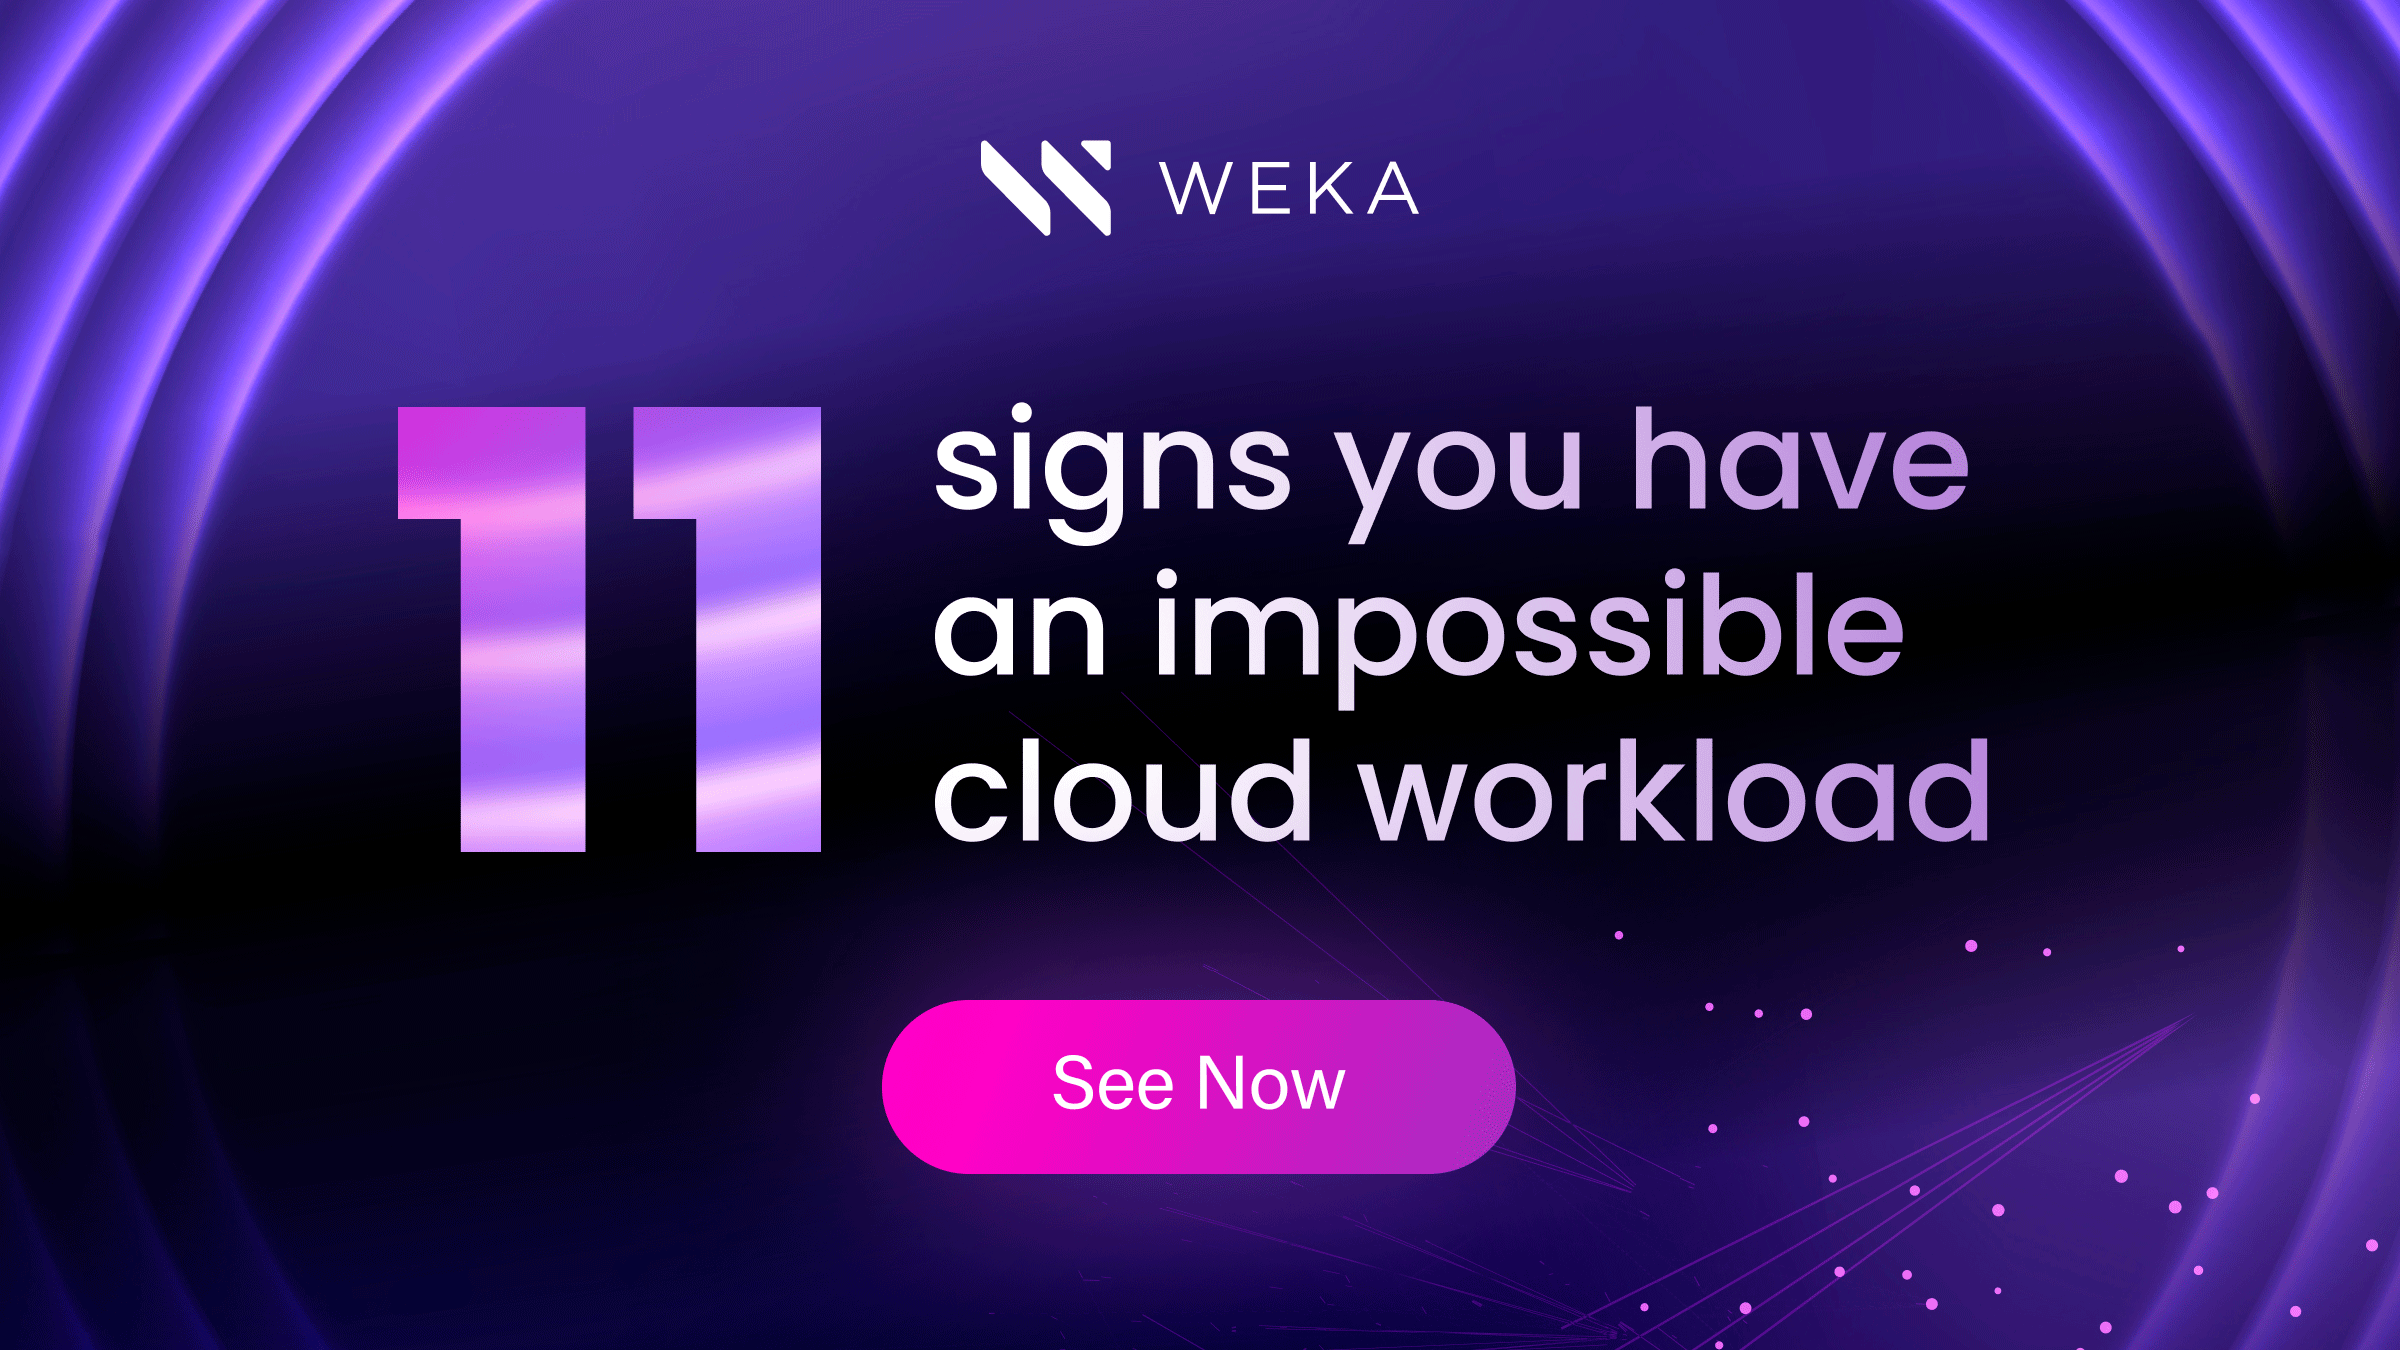 11 Signs you have an impossible cloud workload